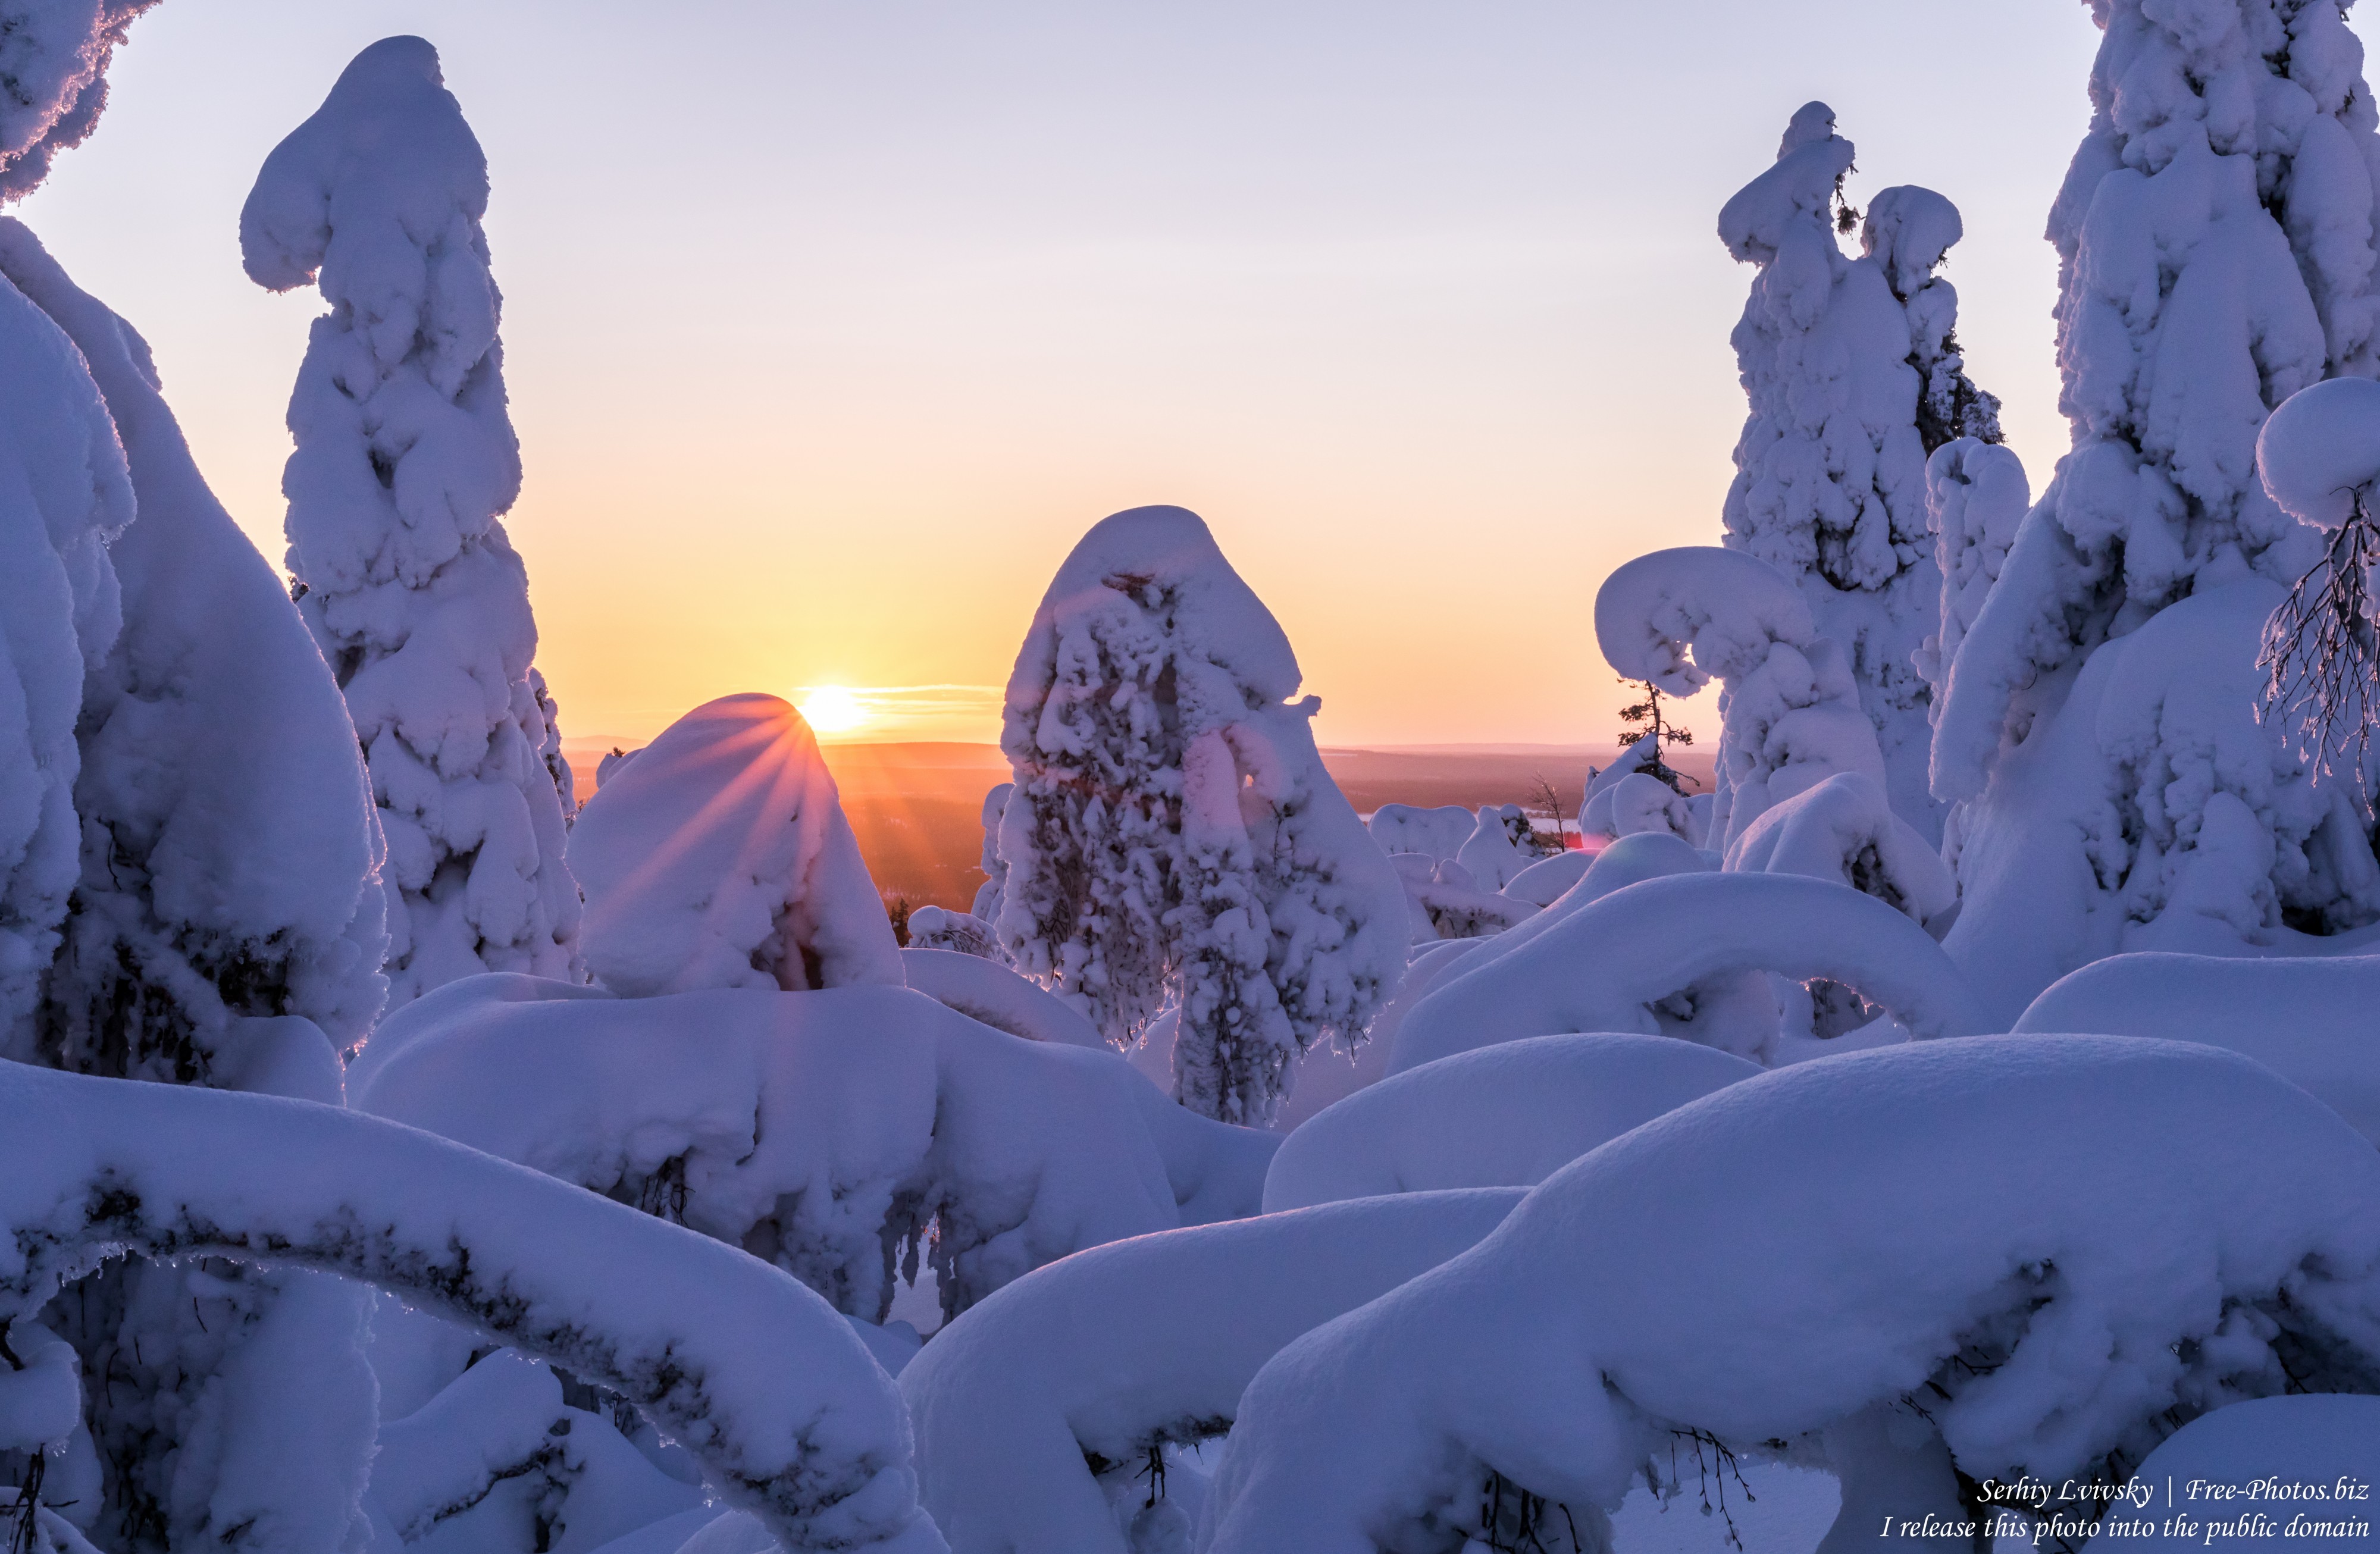 Valtavaara, Finland, photographed in January 2020 by Serhiy Lvivsky, picture 14